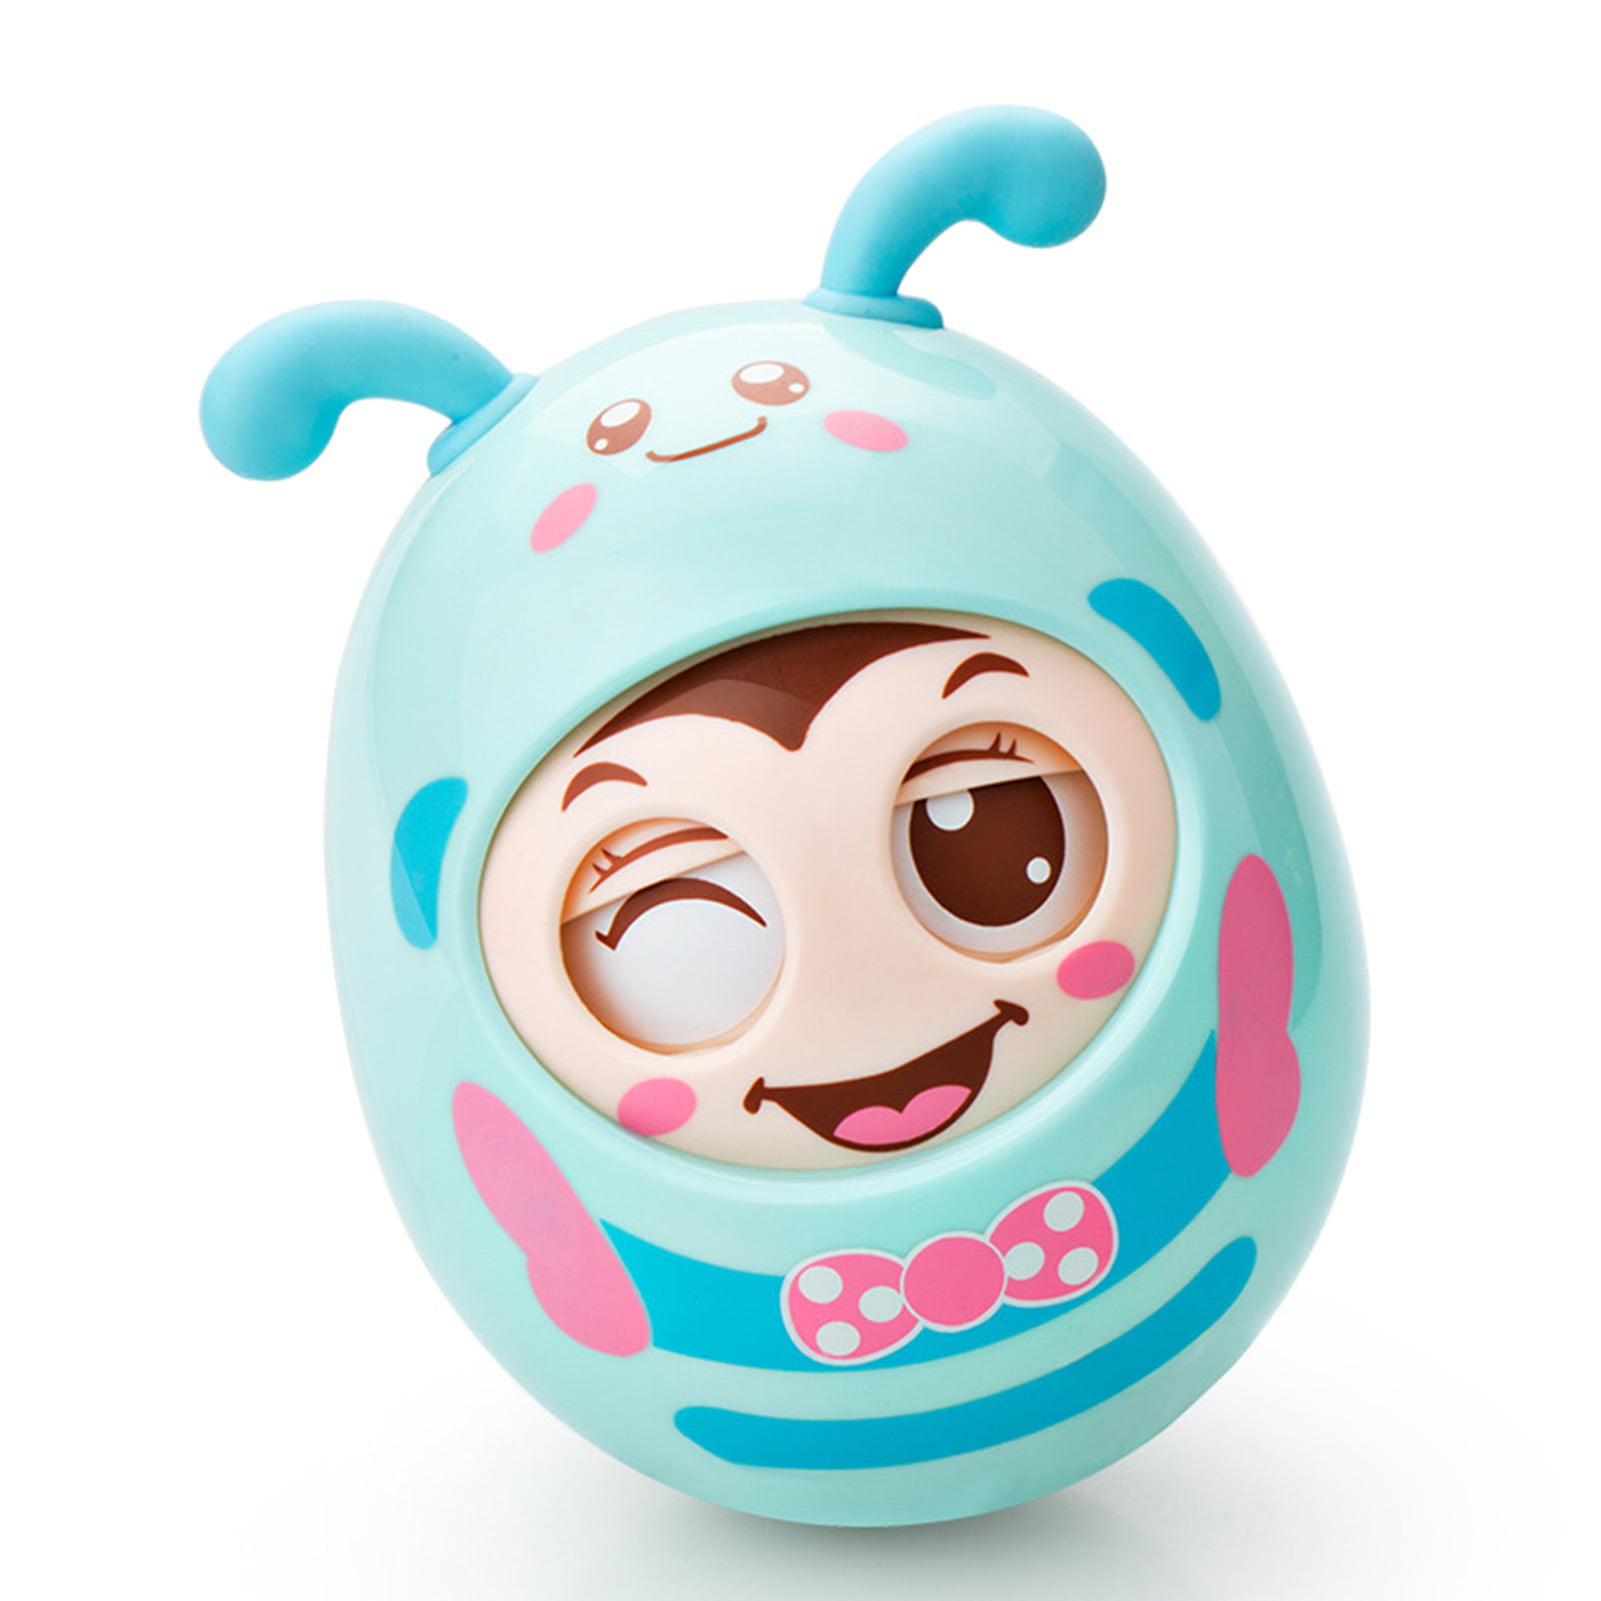 SunHLX Cartoon Baby Tumbler Toy Wink Design Educational Cute Tumbler Roly- poly Toy for Child 